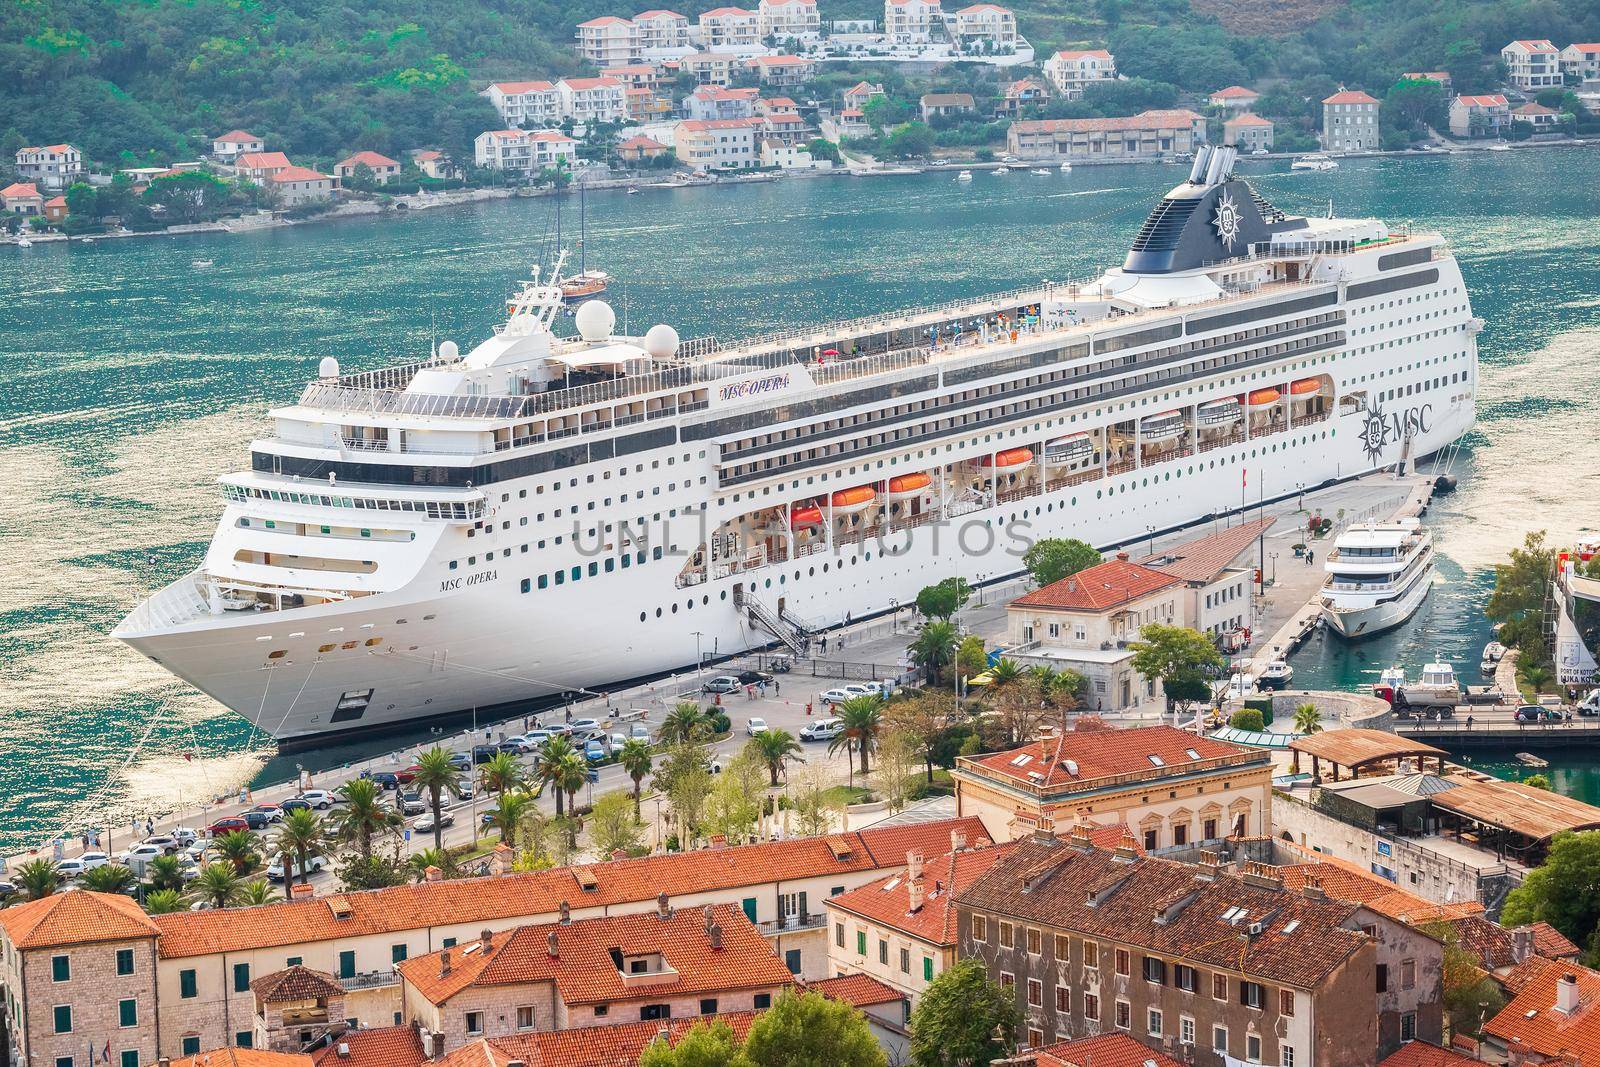 Large cruise ship arrived in the bay of Kotor by Syvanych